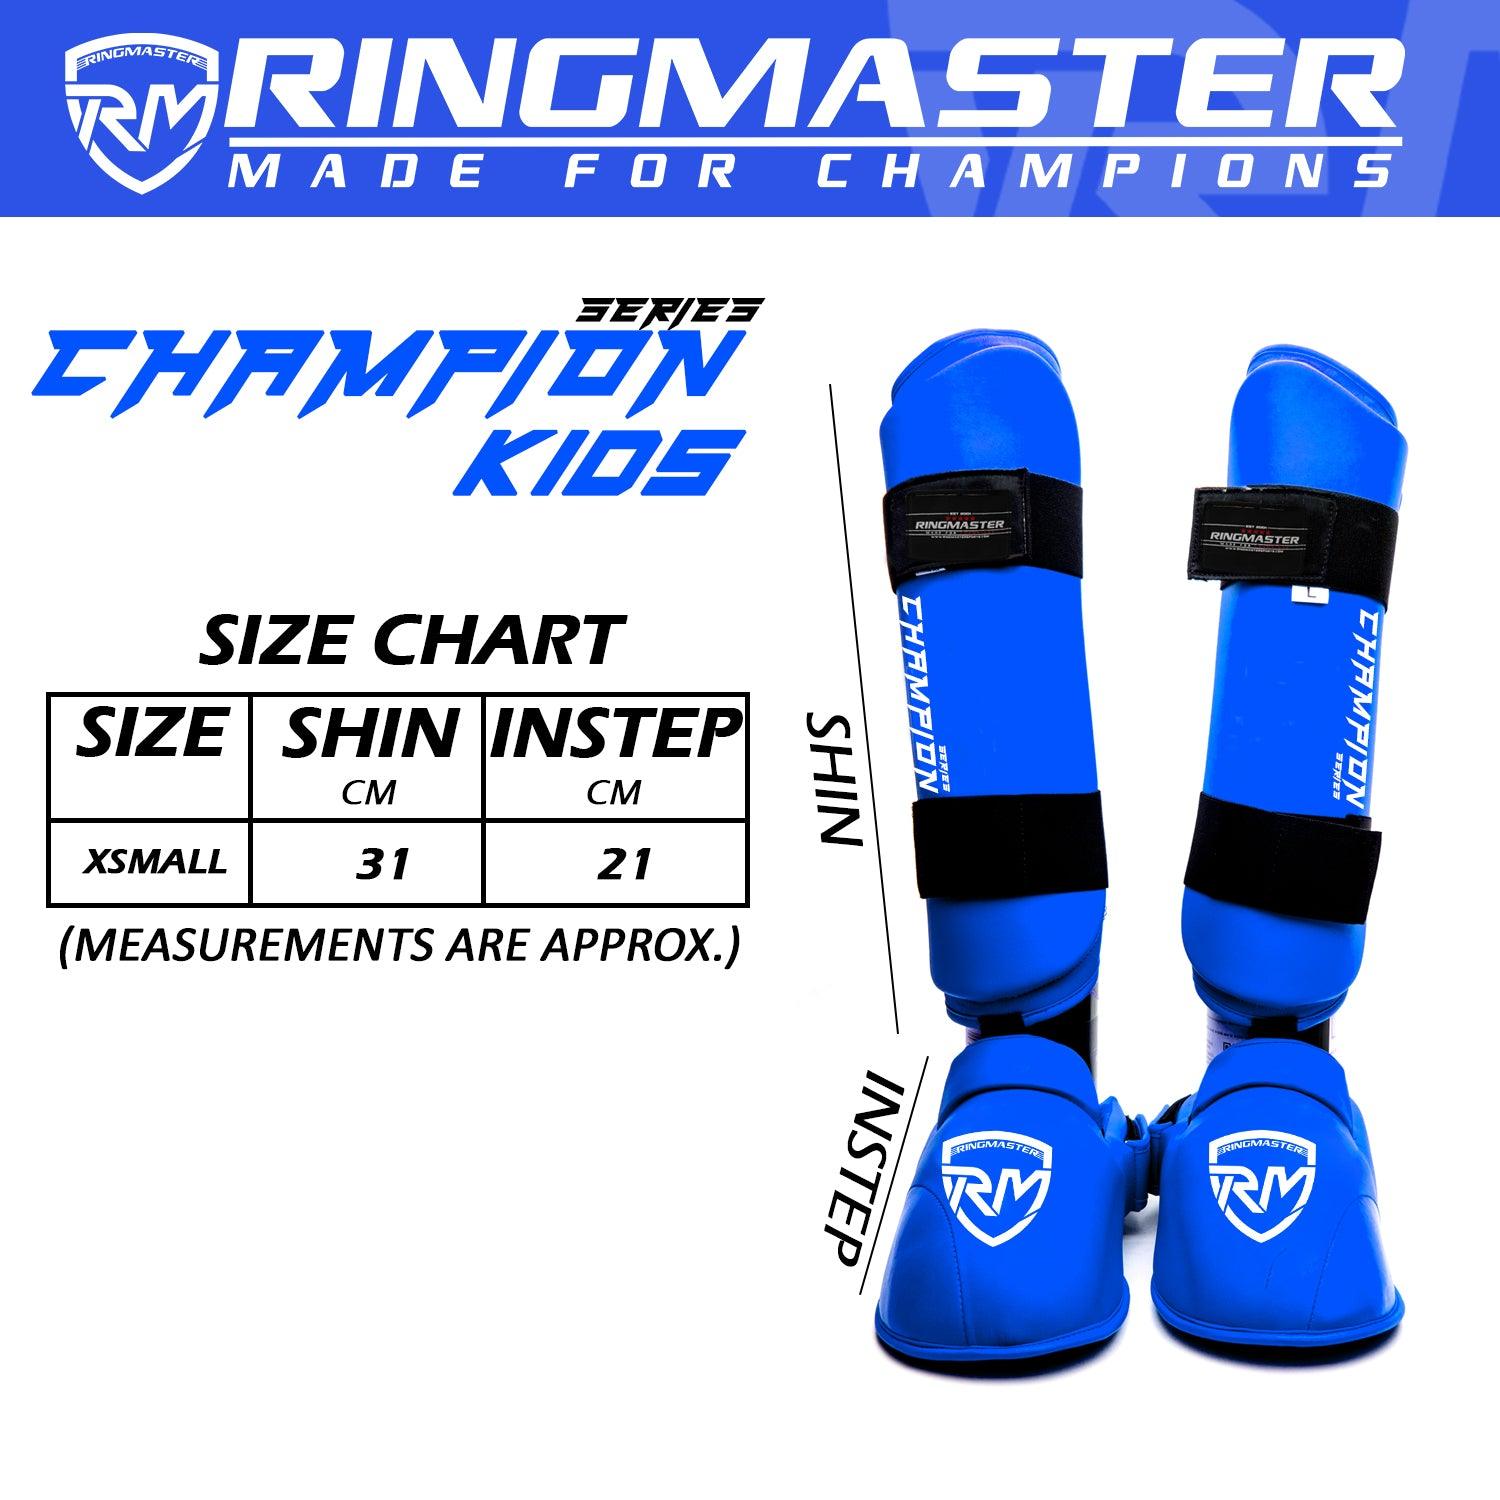 RingMaster Sports Synthetic Leather WKF Styled Kids Karate Shin Instep Guards Blue martial arts image 4